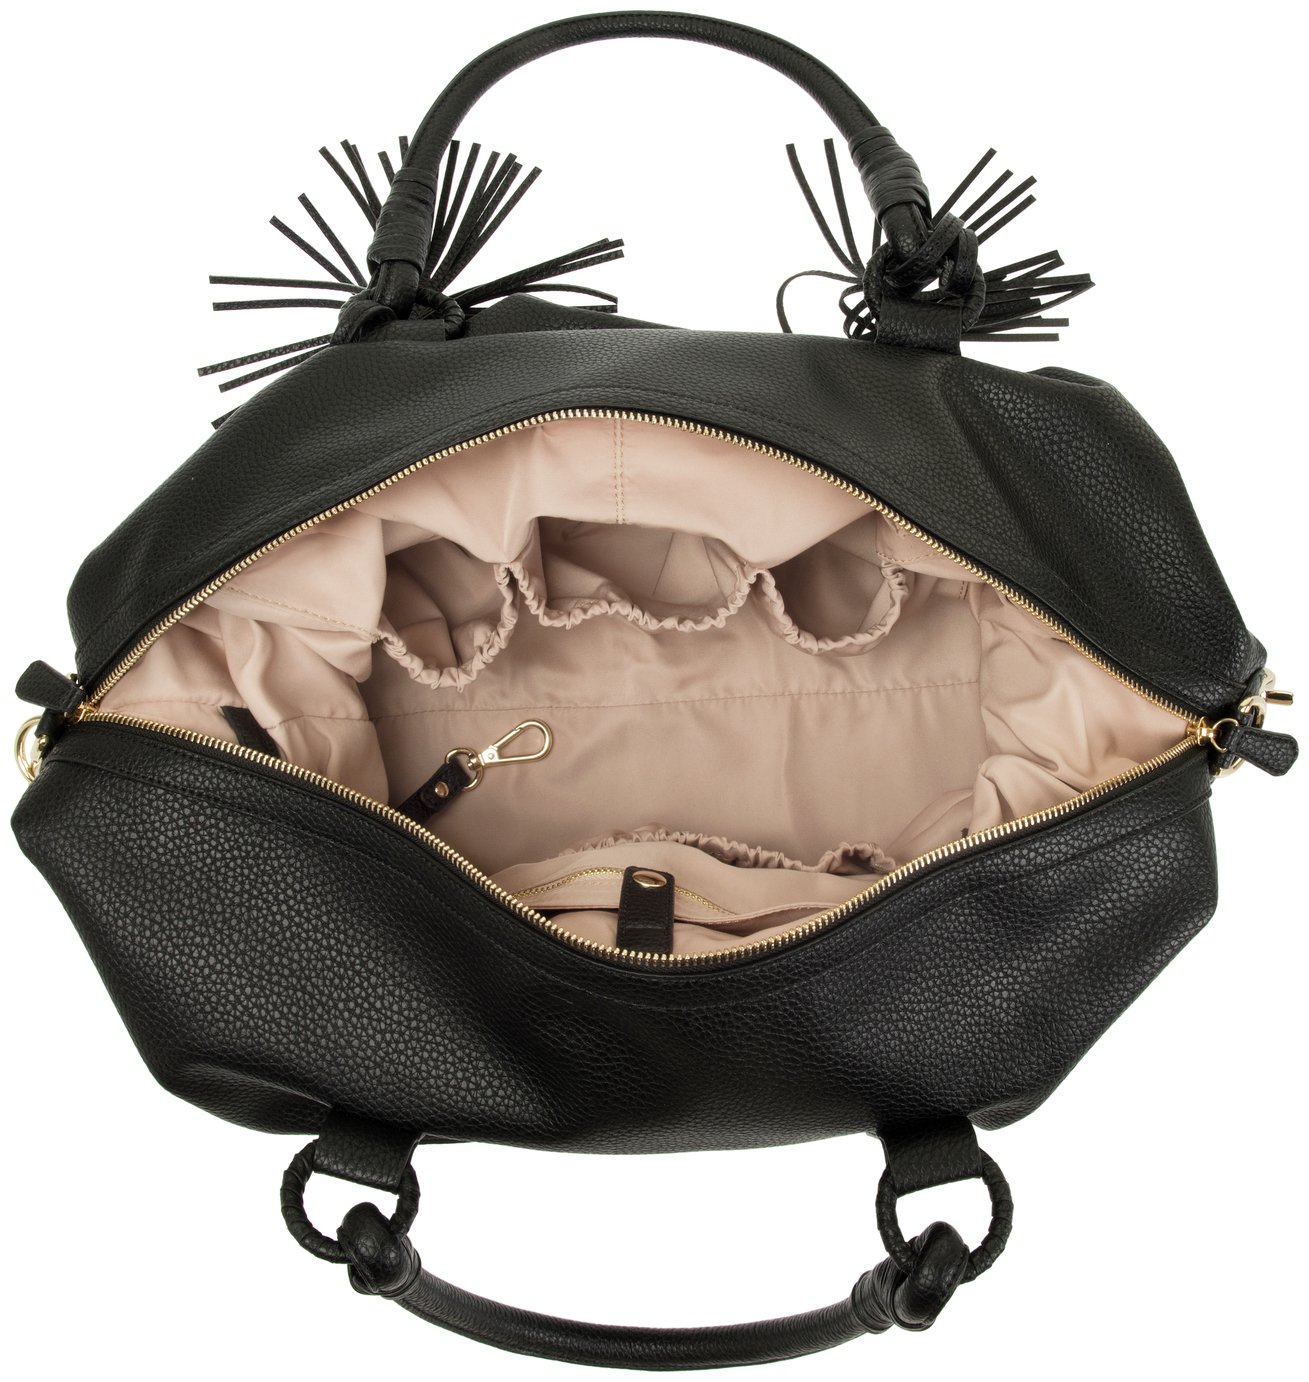 Meribel Luxury Slouch Baby Changing Bag with Changing Mat from Zellie Black